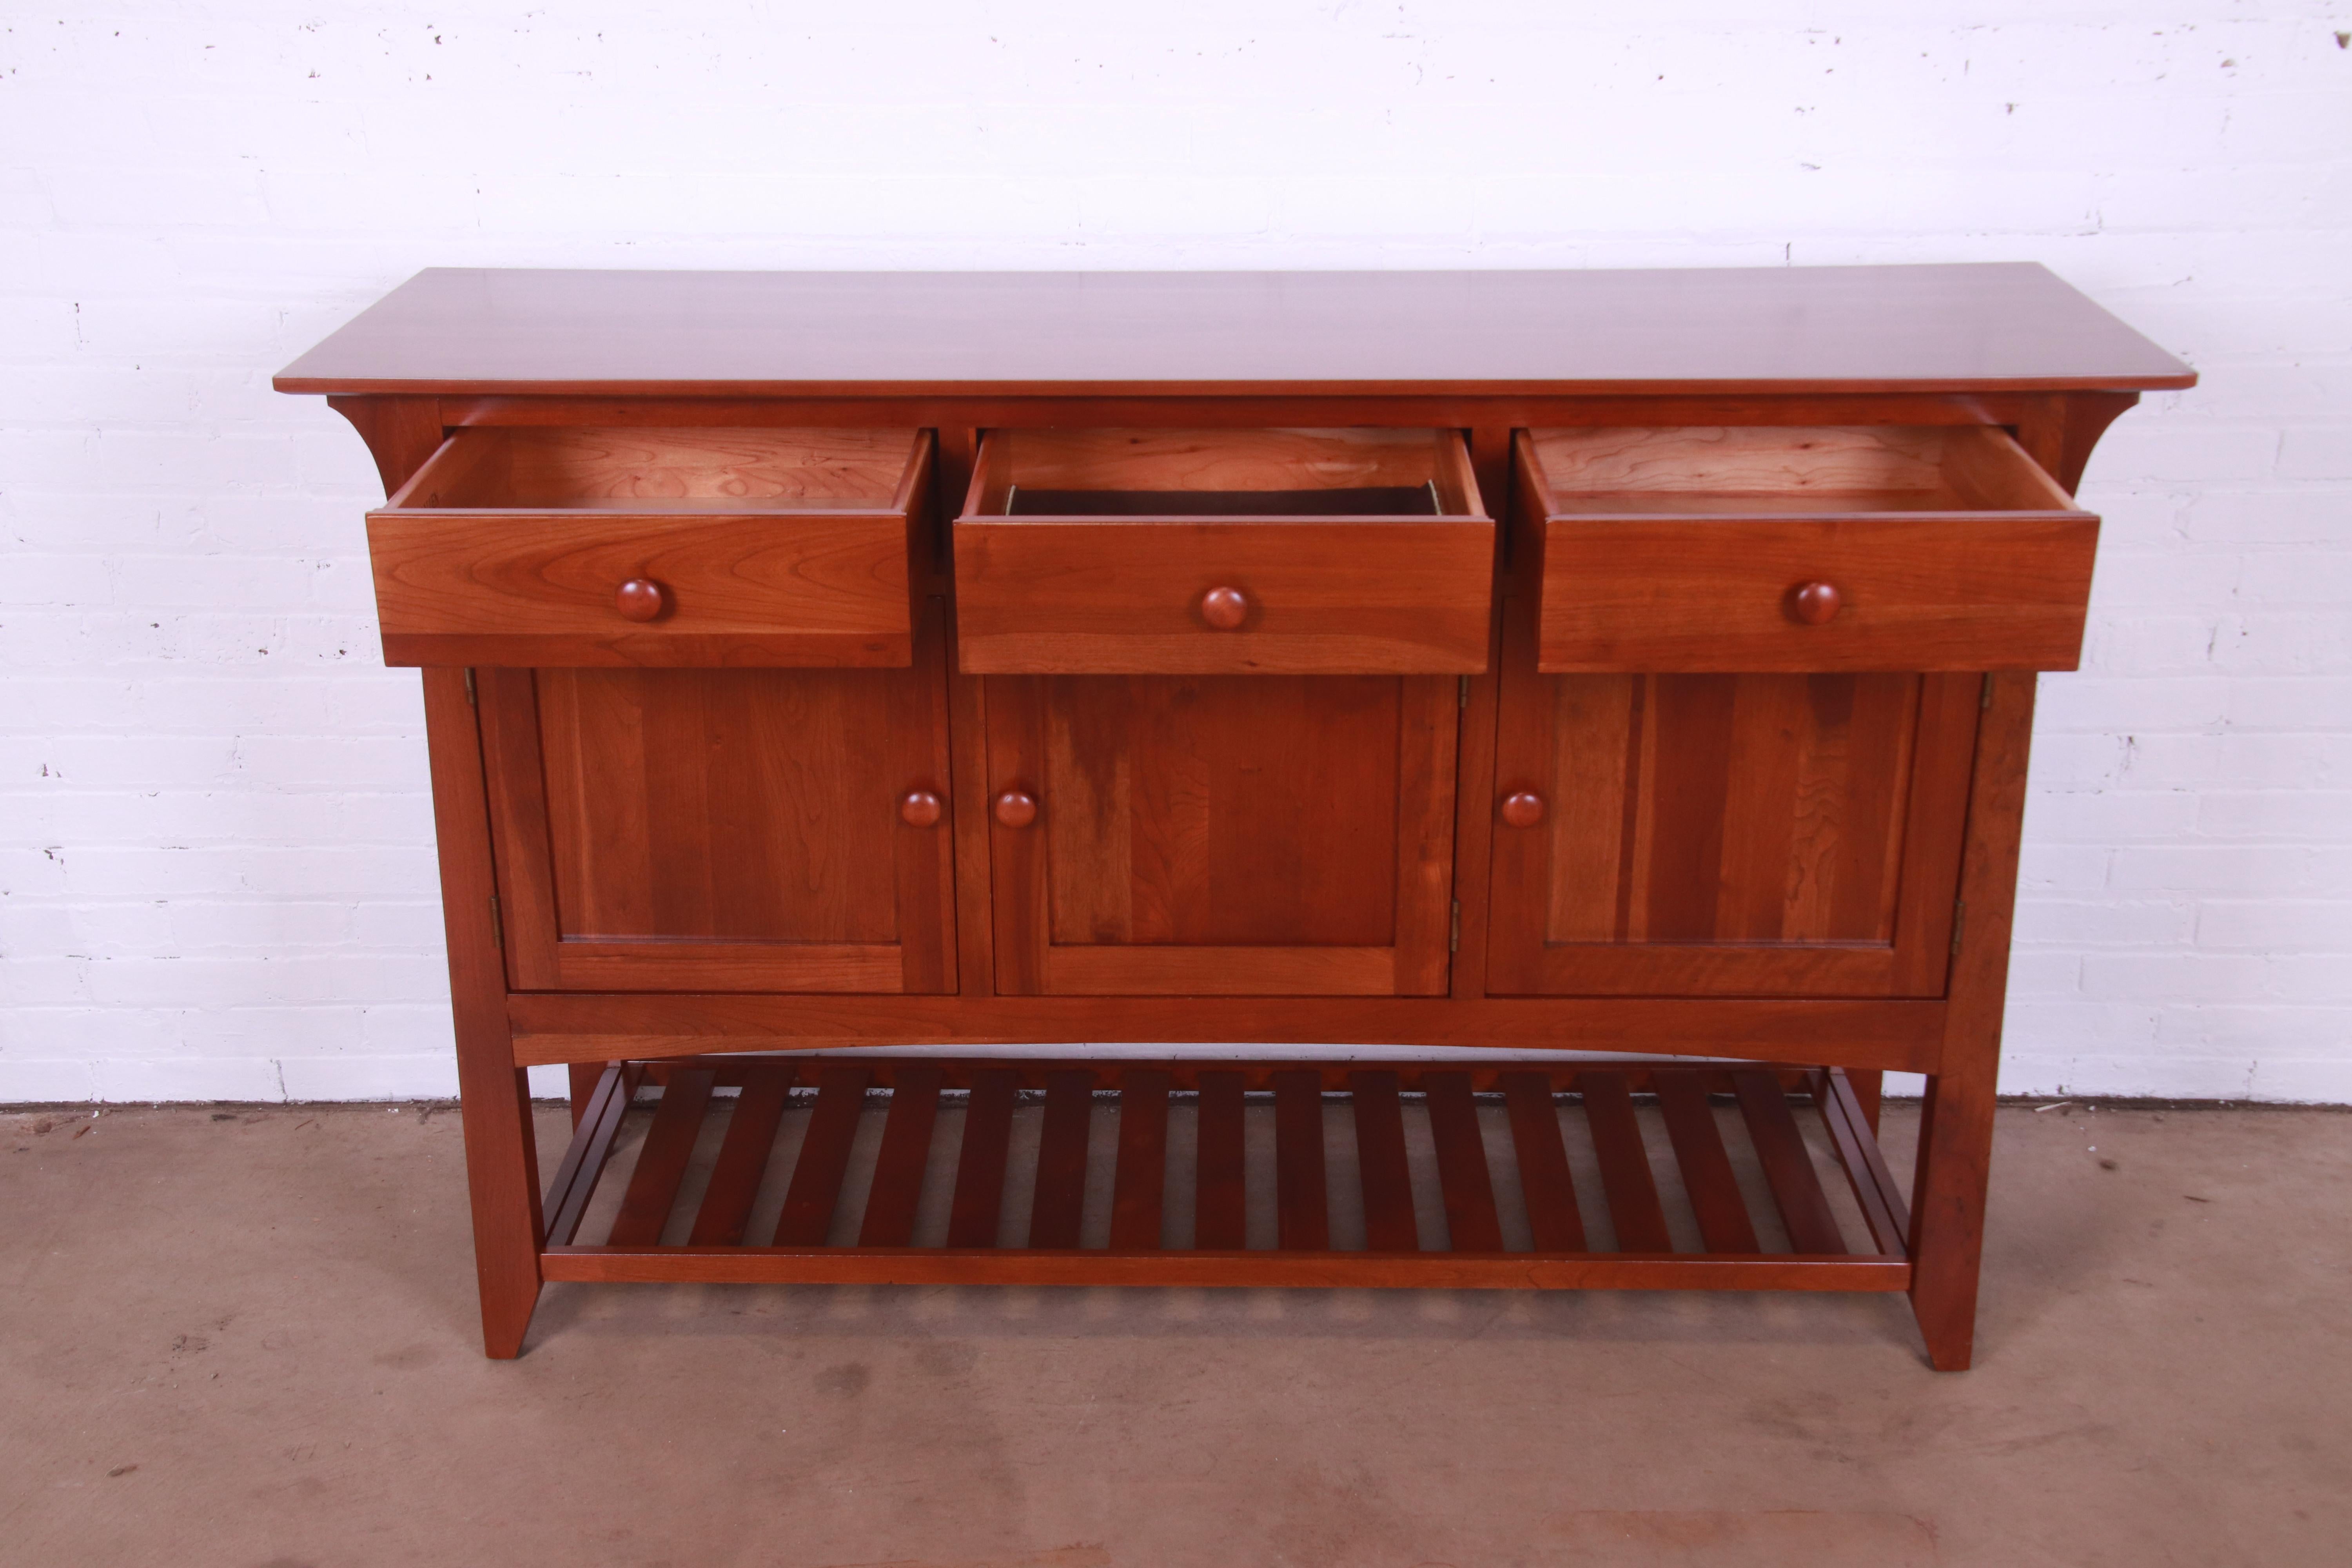 20th Century Ethan Allen Arts & Crafts Cherry Wood Sideboard or Bar Cabinet, Newly Refinished